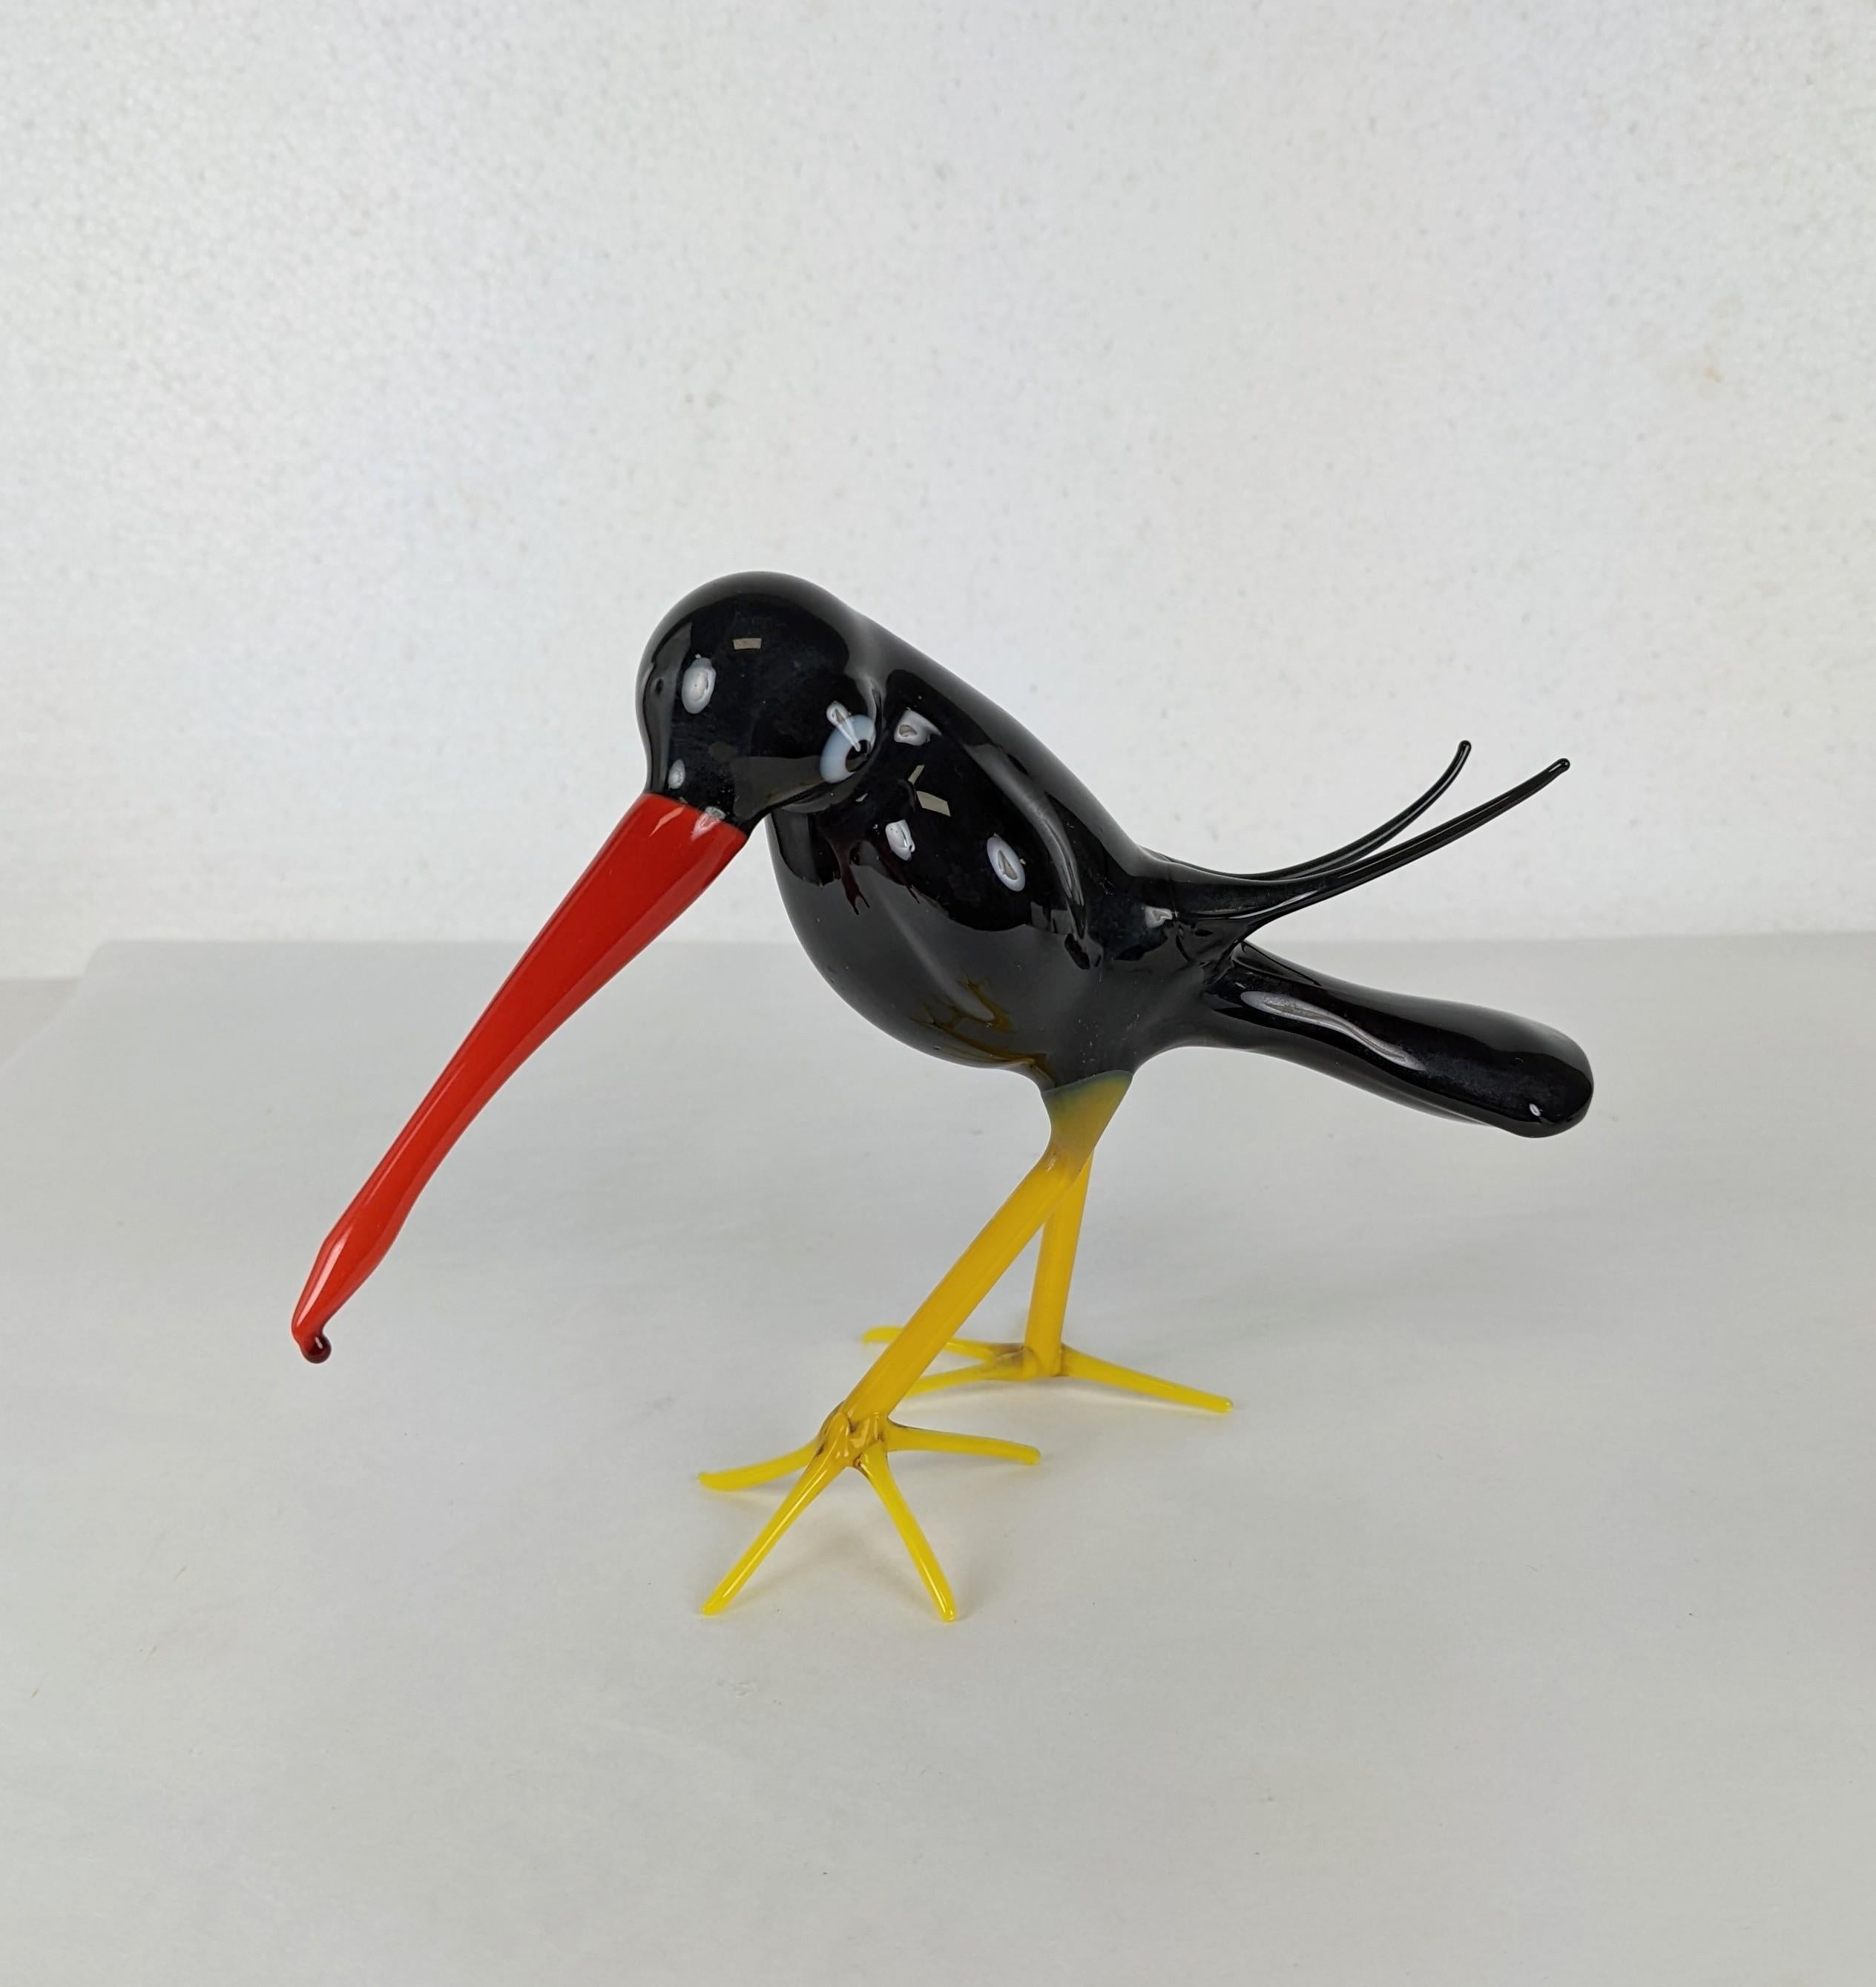 Bimini glass exotic cartoon bird from the Art Deco period, circa 1930's. With a Disneyesque look and striking stance. Delicate hollow blown construction in vibrant colorations. Excellent condition. 
Austria circa 1930's. 7